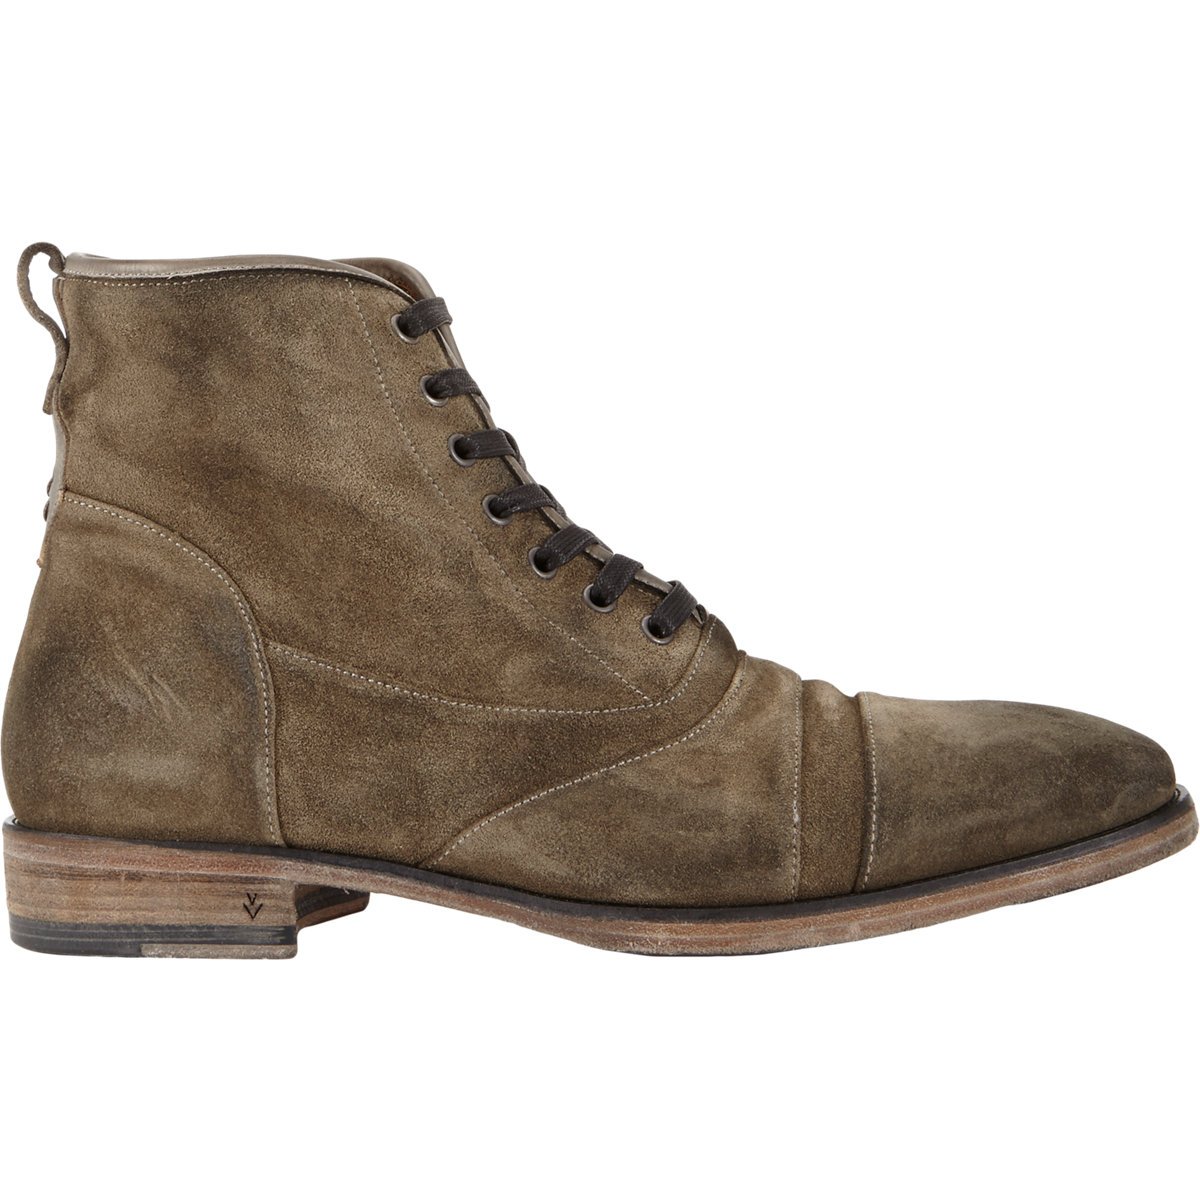 Lyst - John Varvatos Fleetwood Lace-Up Boots in Gray for Men